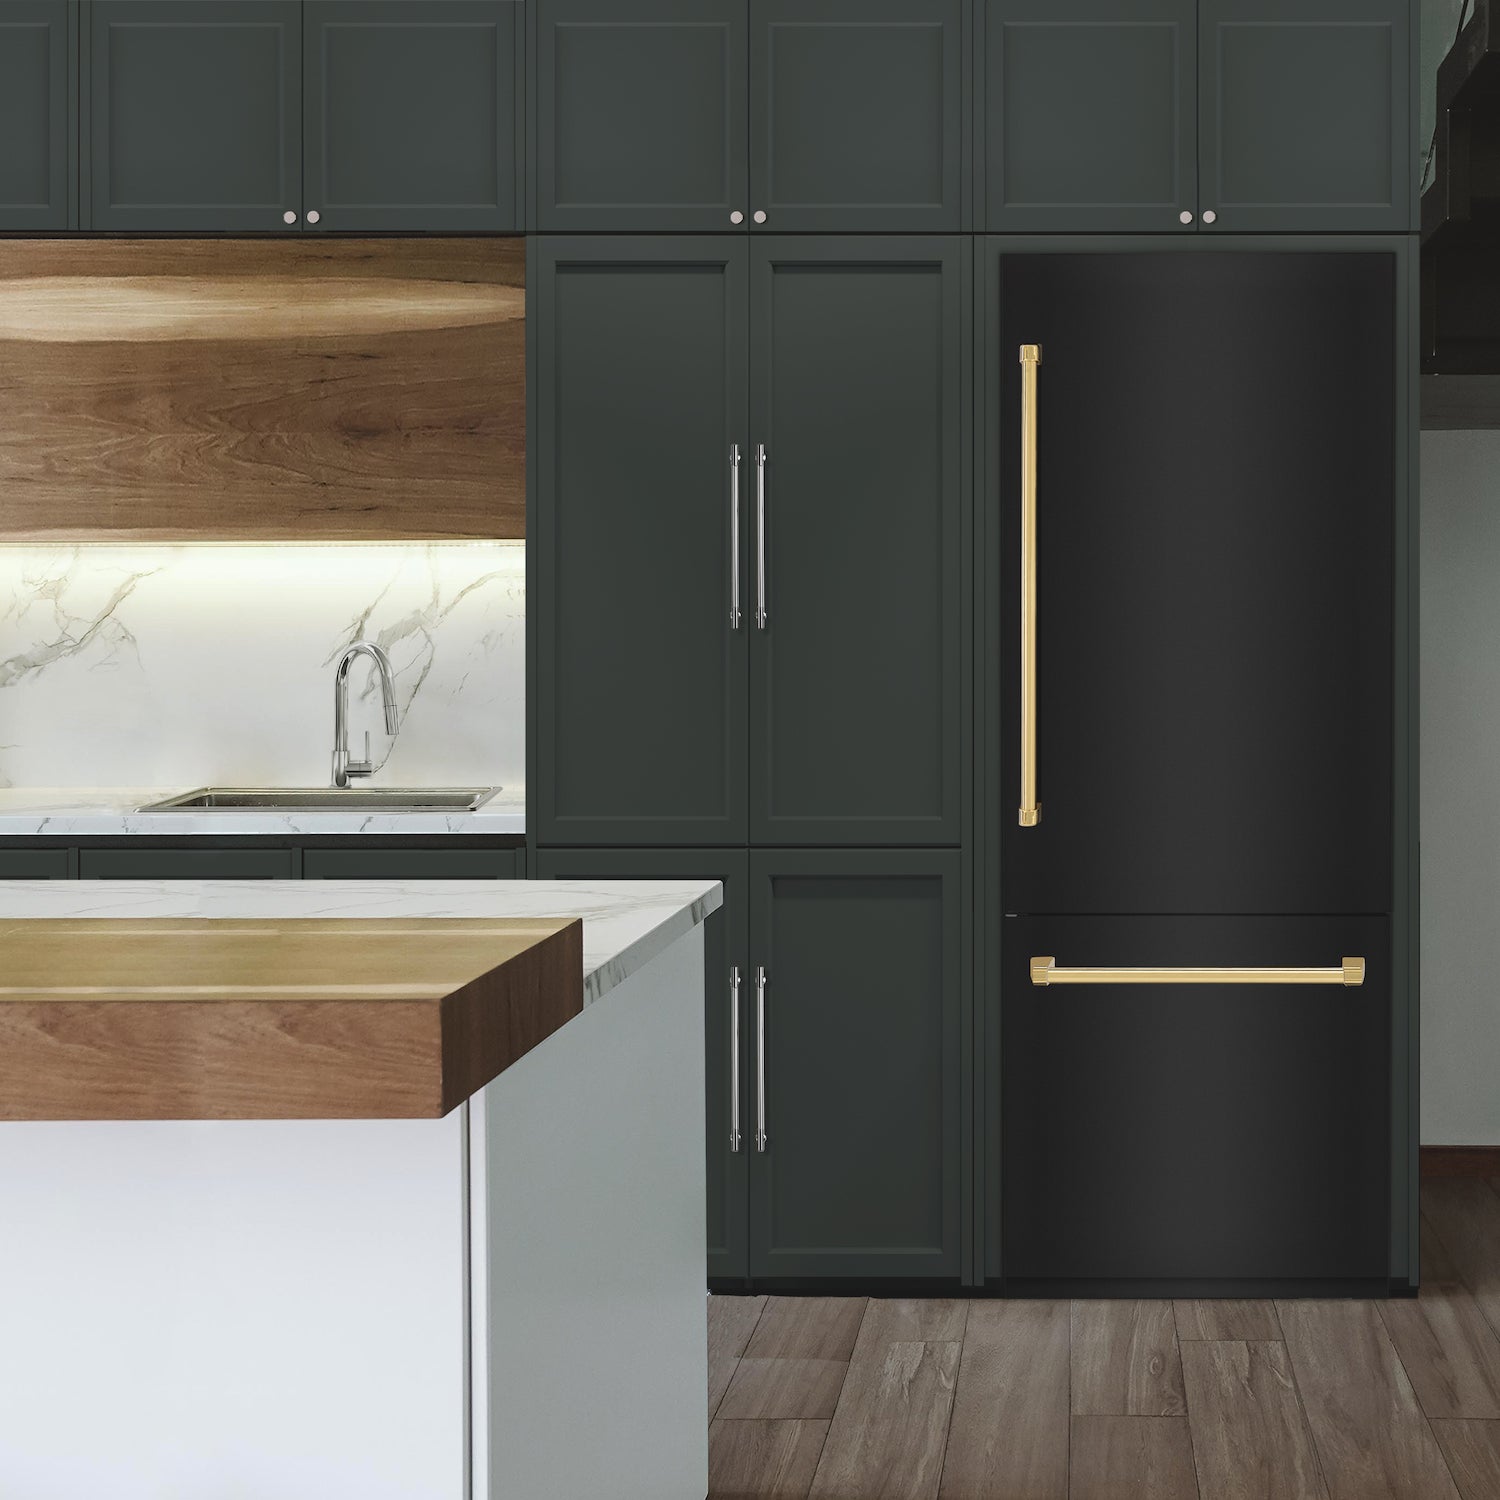 ZLINE Autograph Edition Built-in Refrigerator in Black Stainless Steel with Accent Handles in a kitchen.